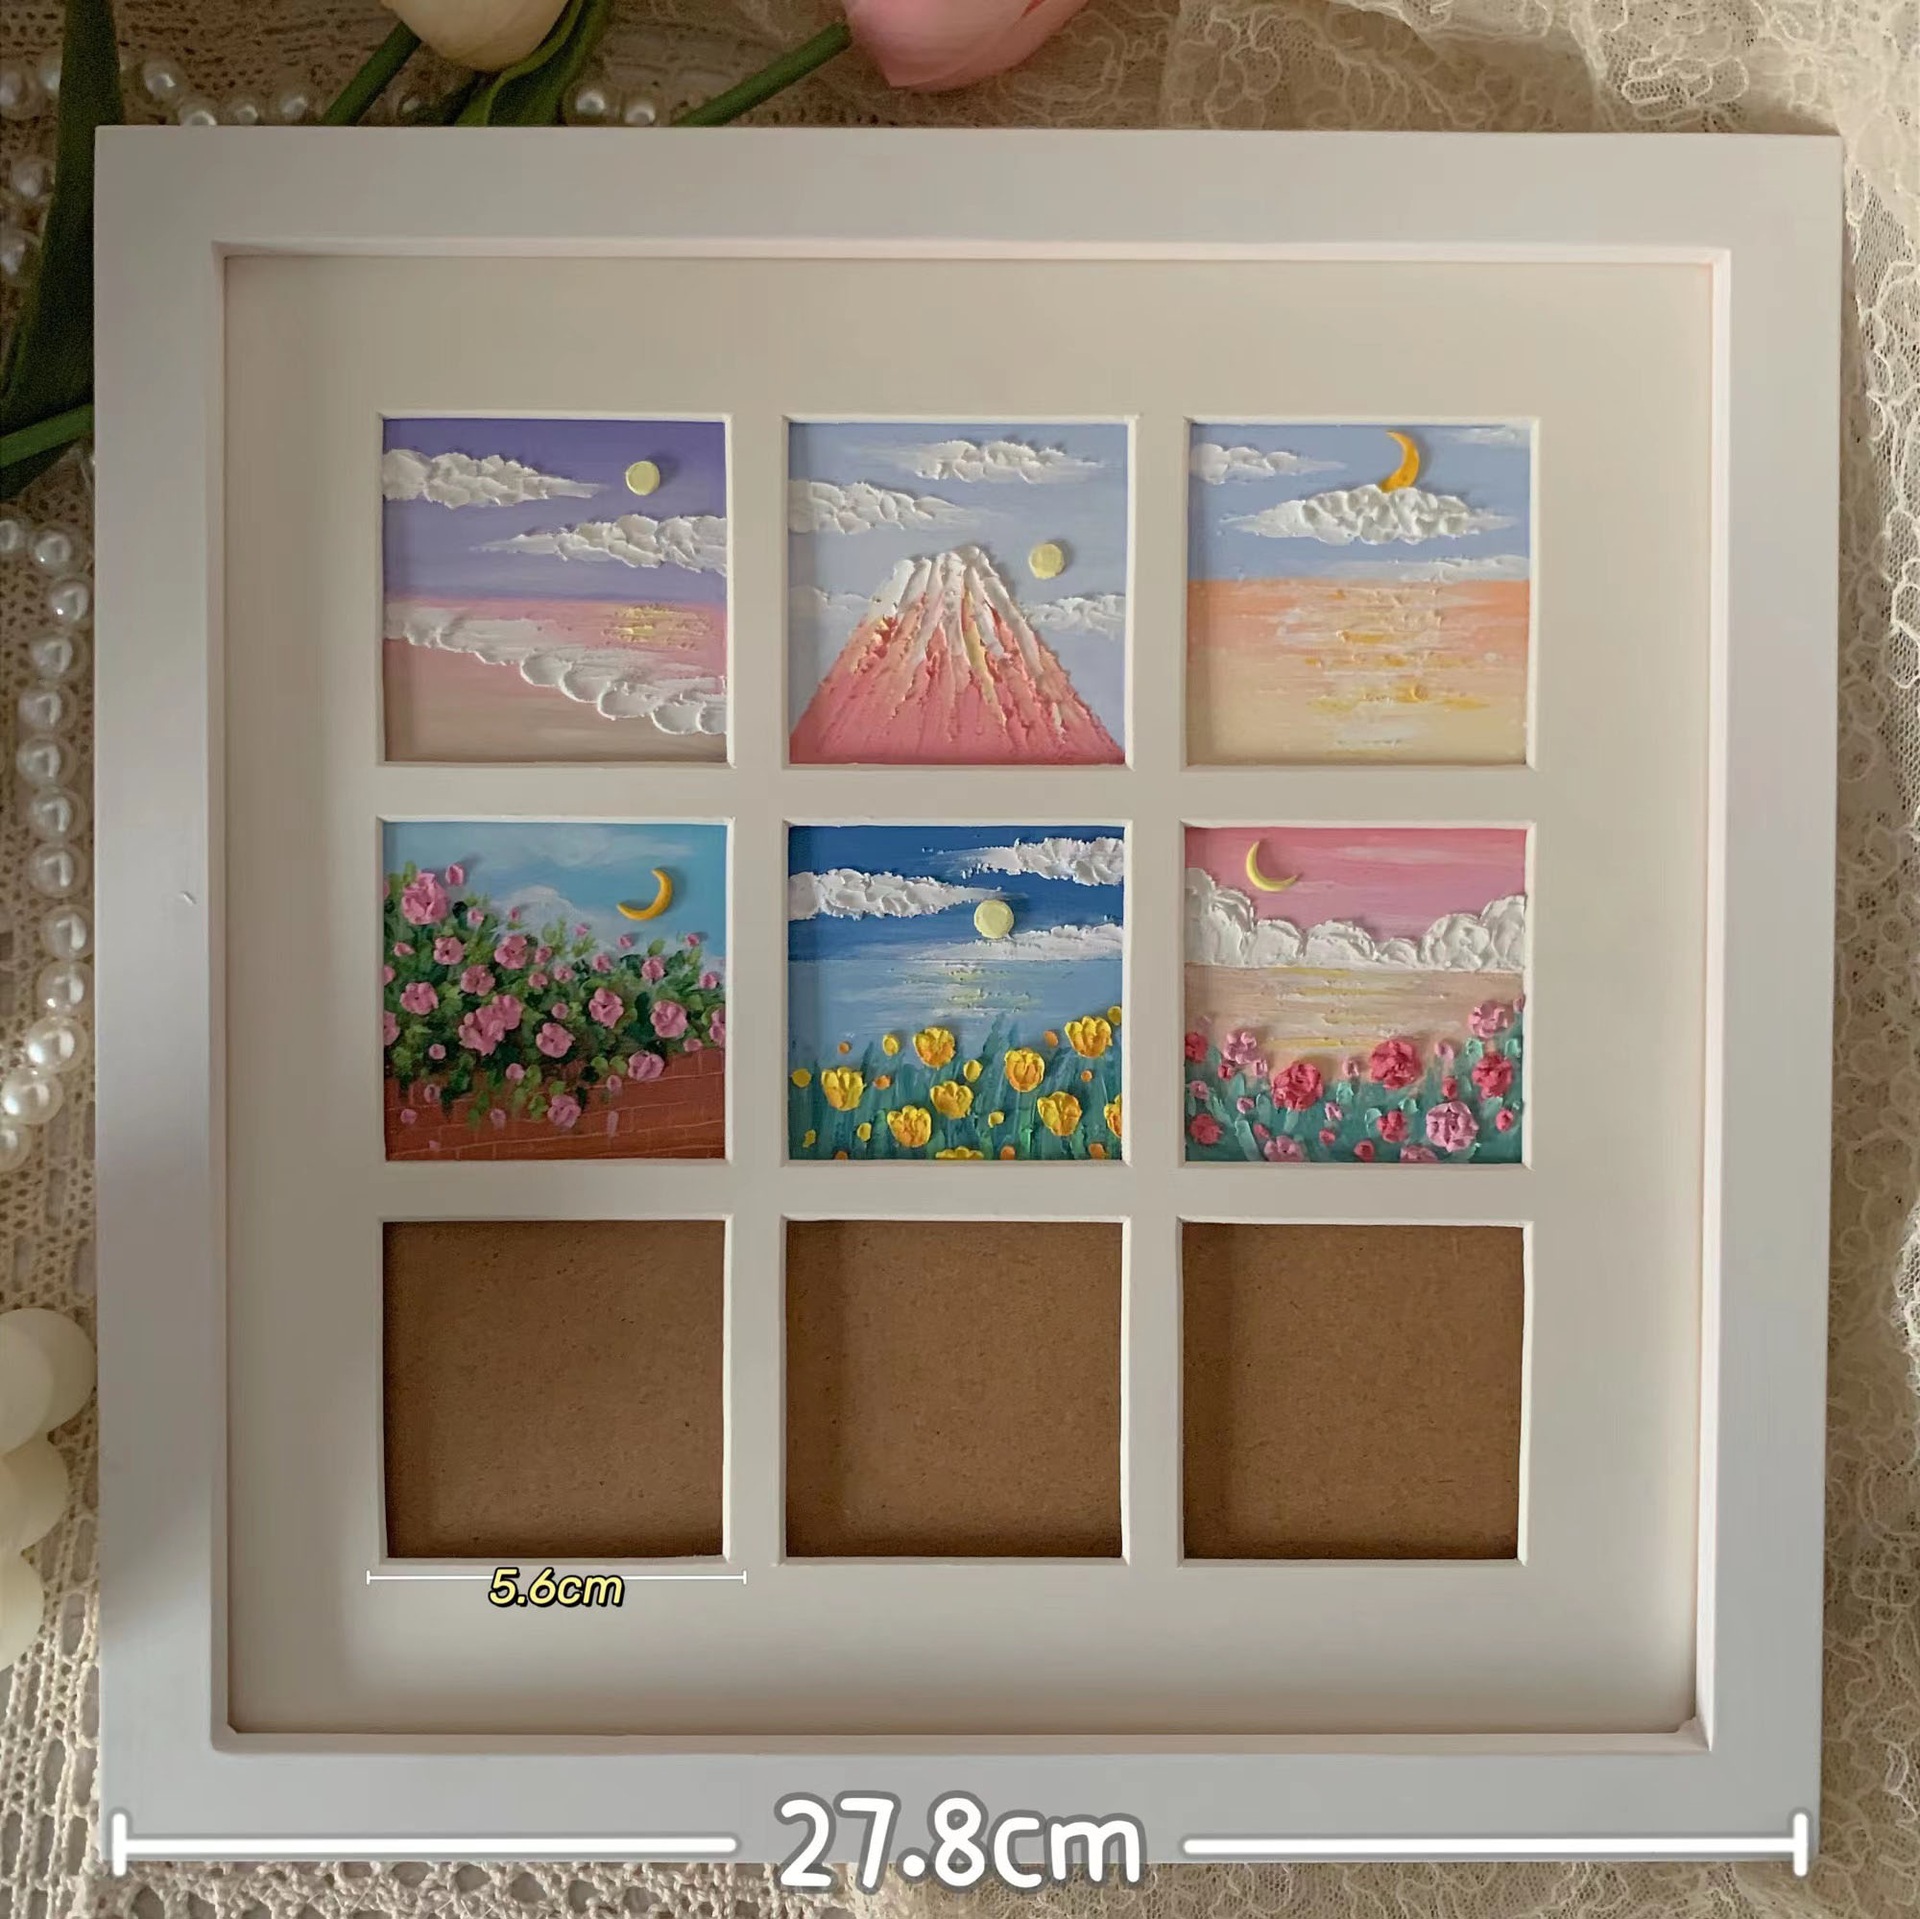 Four Grid Canvas Frame Square 10x10 No Pressure Stereograph Advanced Simple White Wooden Frame Can Be Hung and Can Be Placed